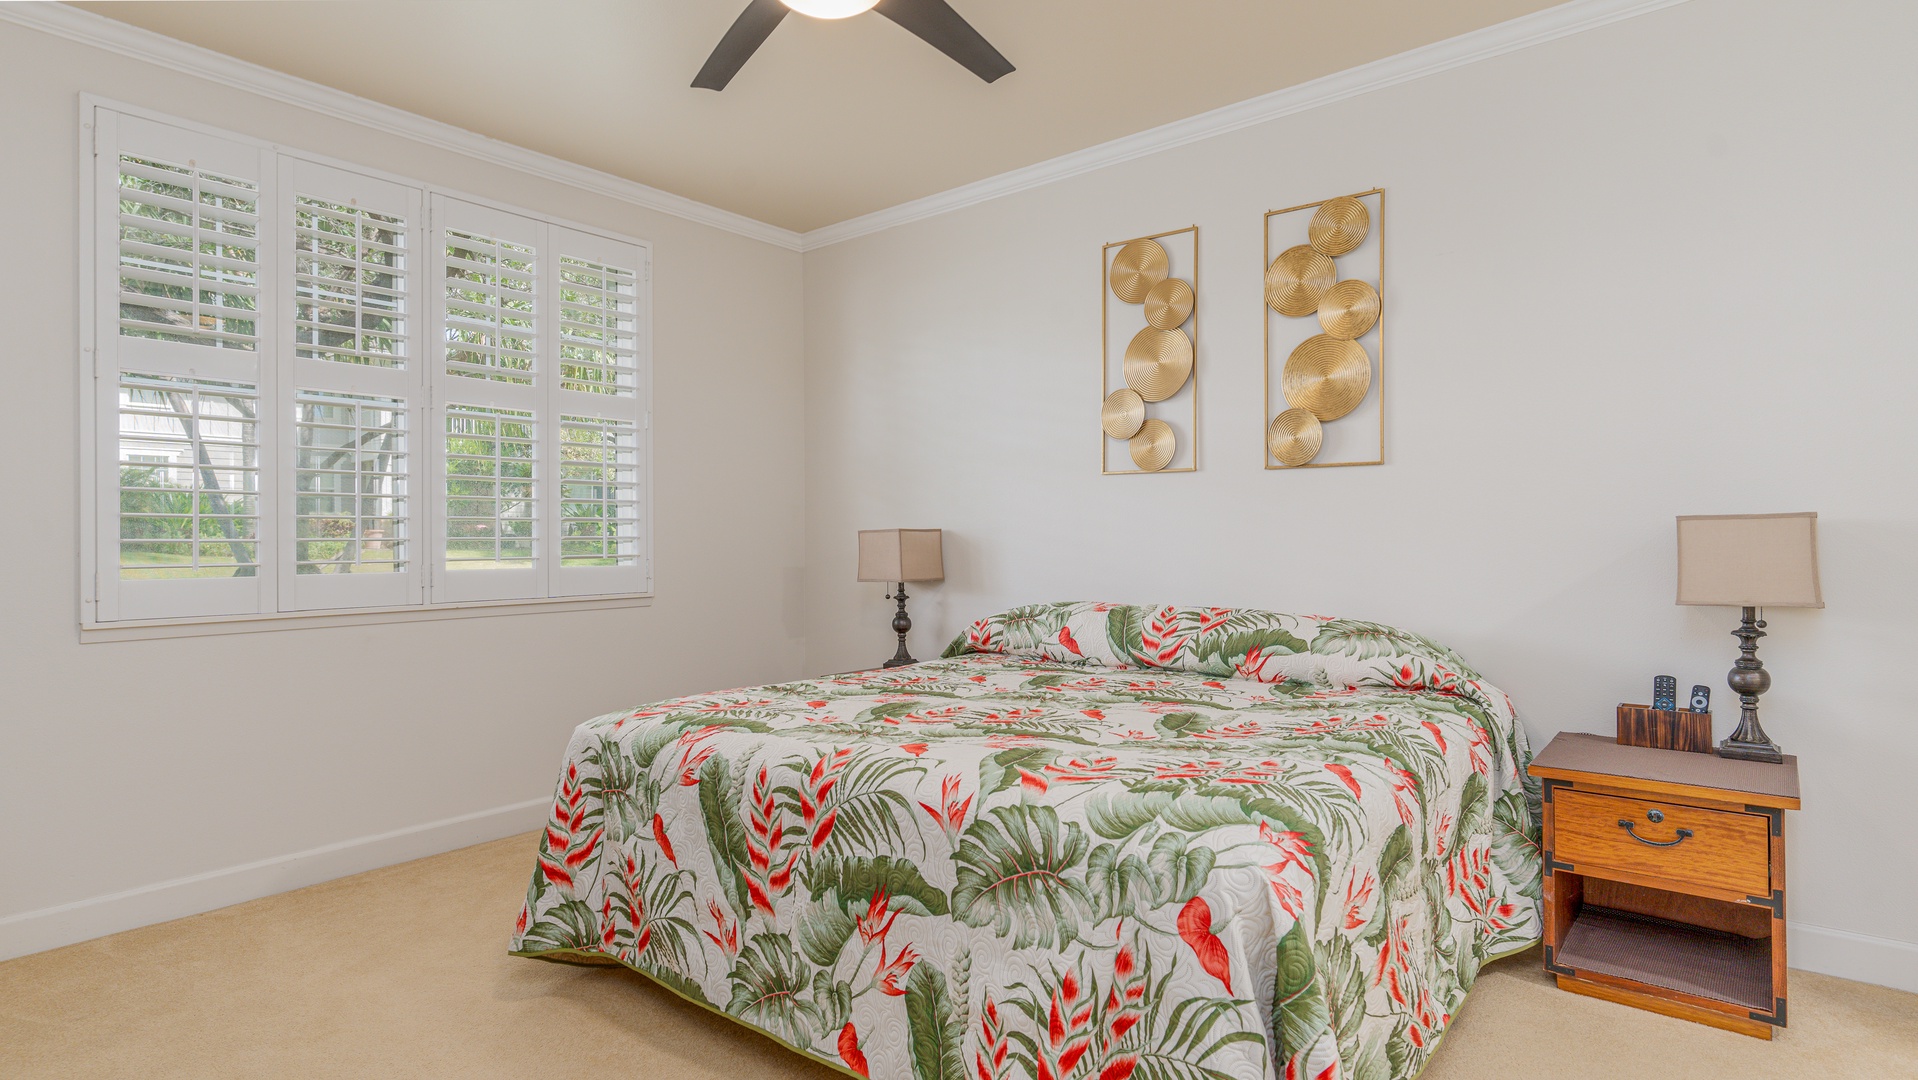 Kapolei Vacation Rentals, Ko Olina Kai 1027A - The spacious primary guest bedroom with a TV and scenery.